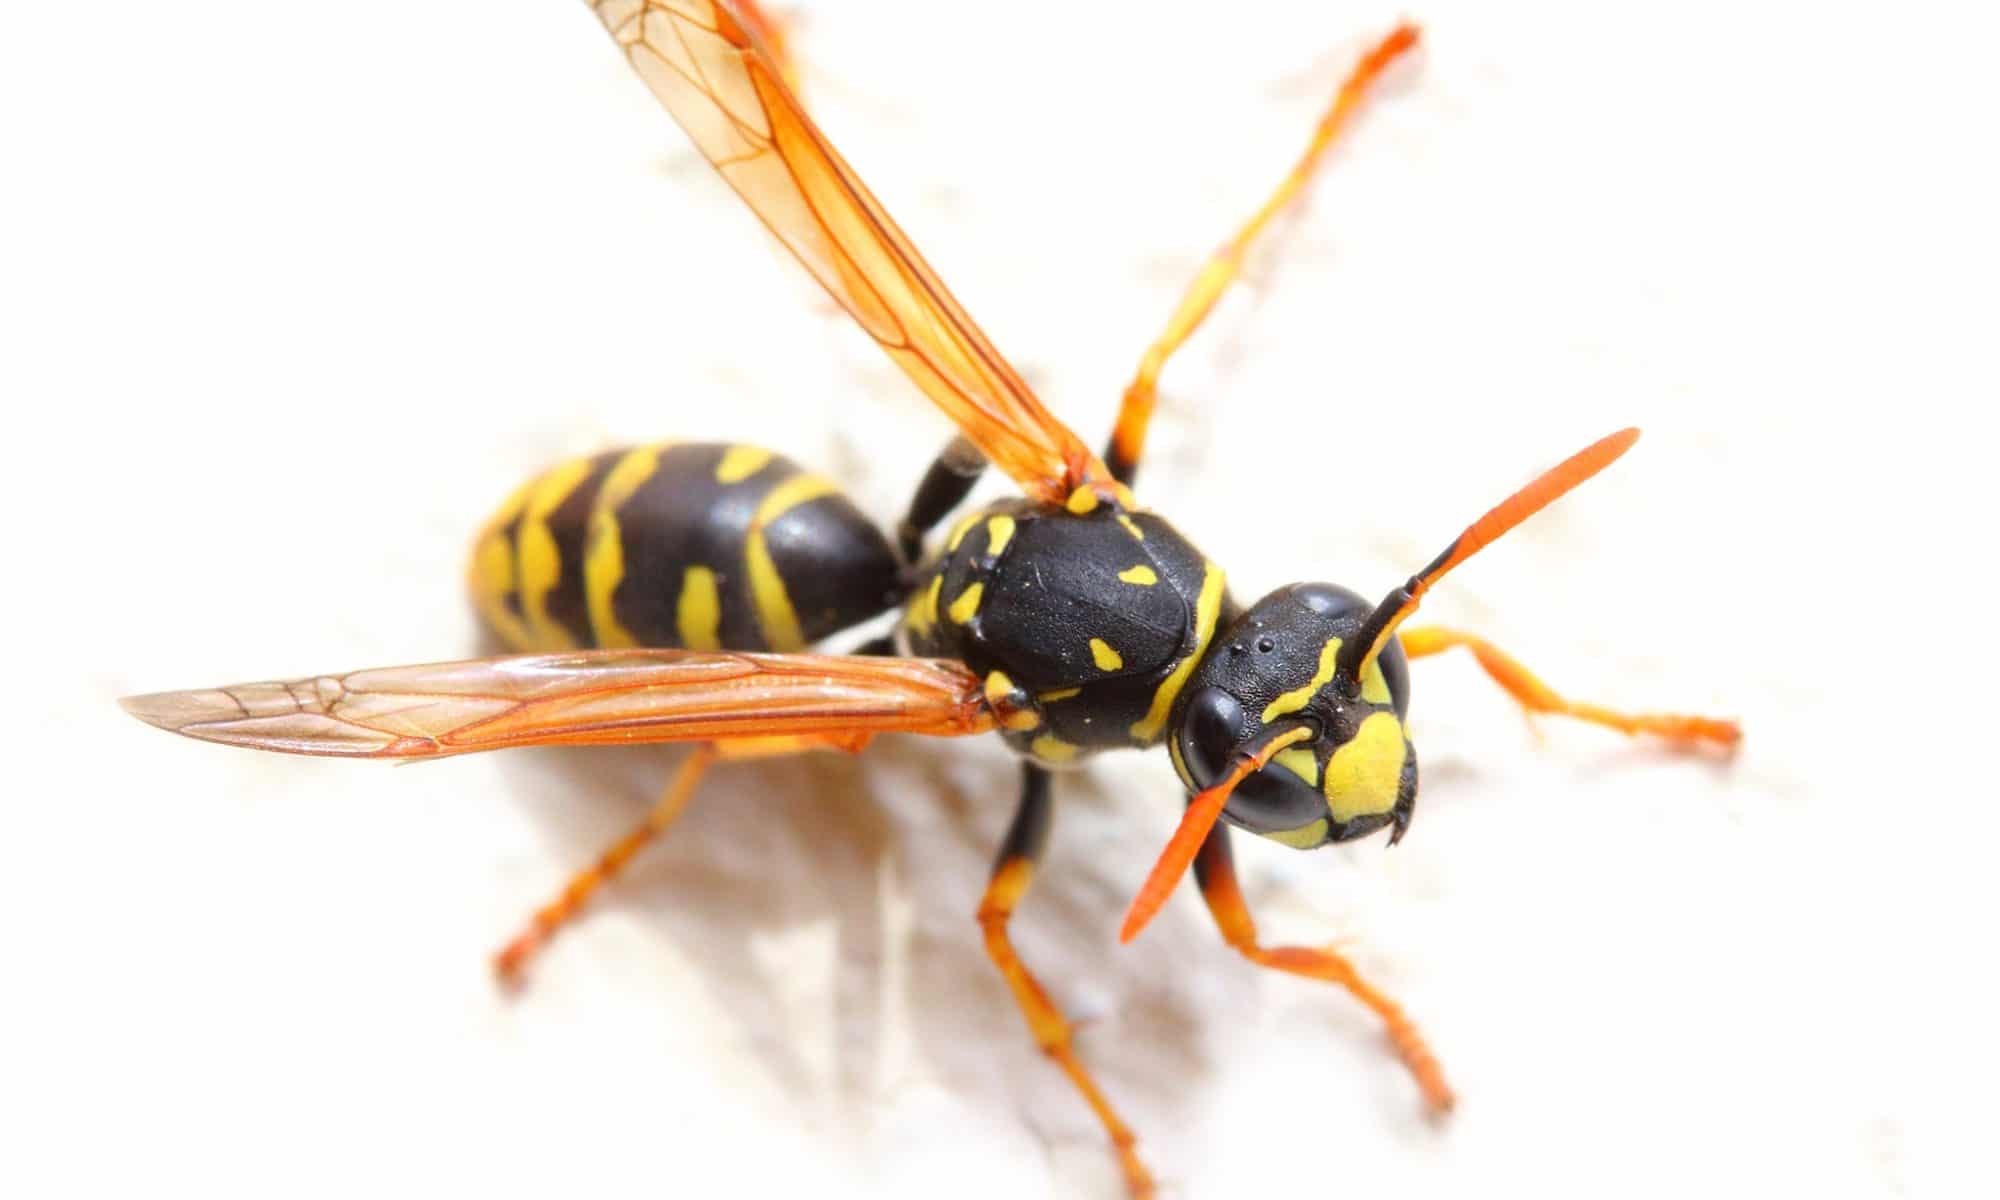 A portrait of a yellow jacket on a white background.